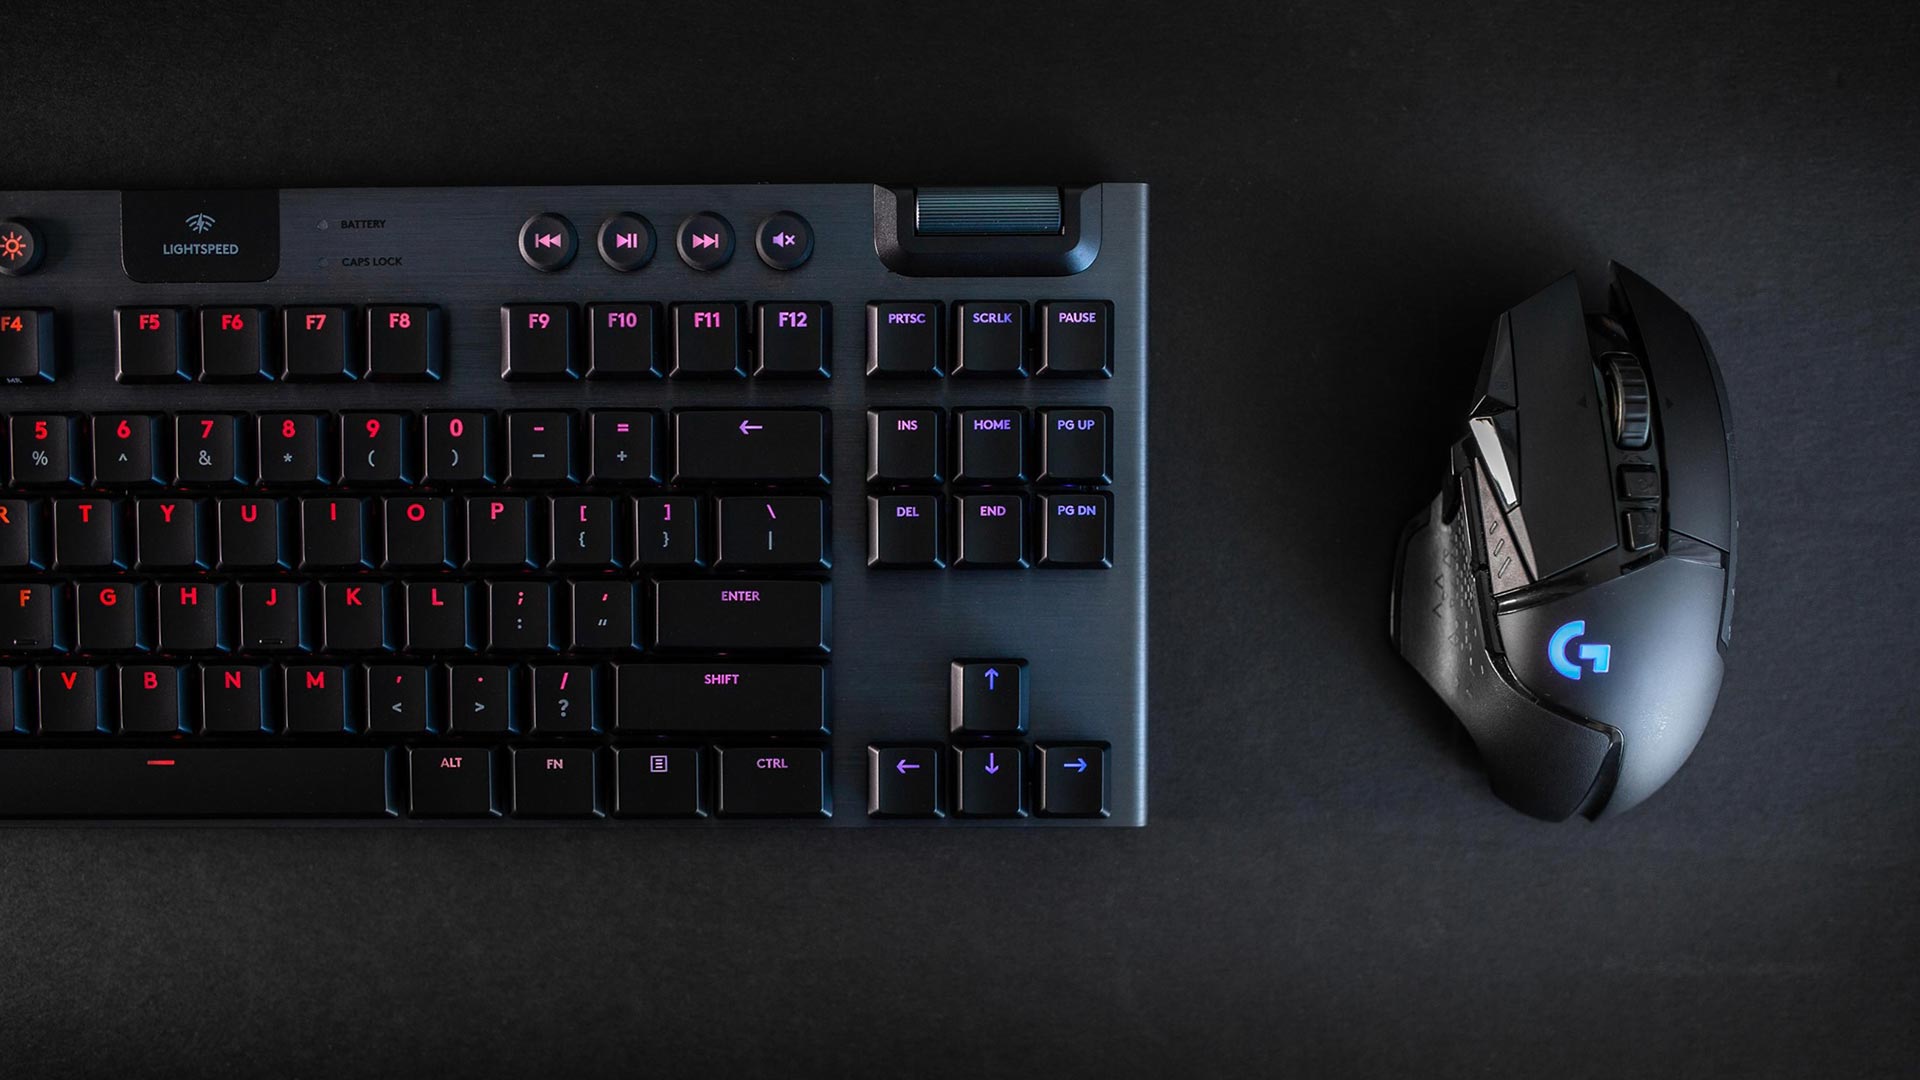 Logitech G915 Lightspeed Keyboard Review - Who Would Buy This? 